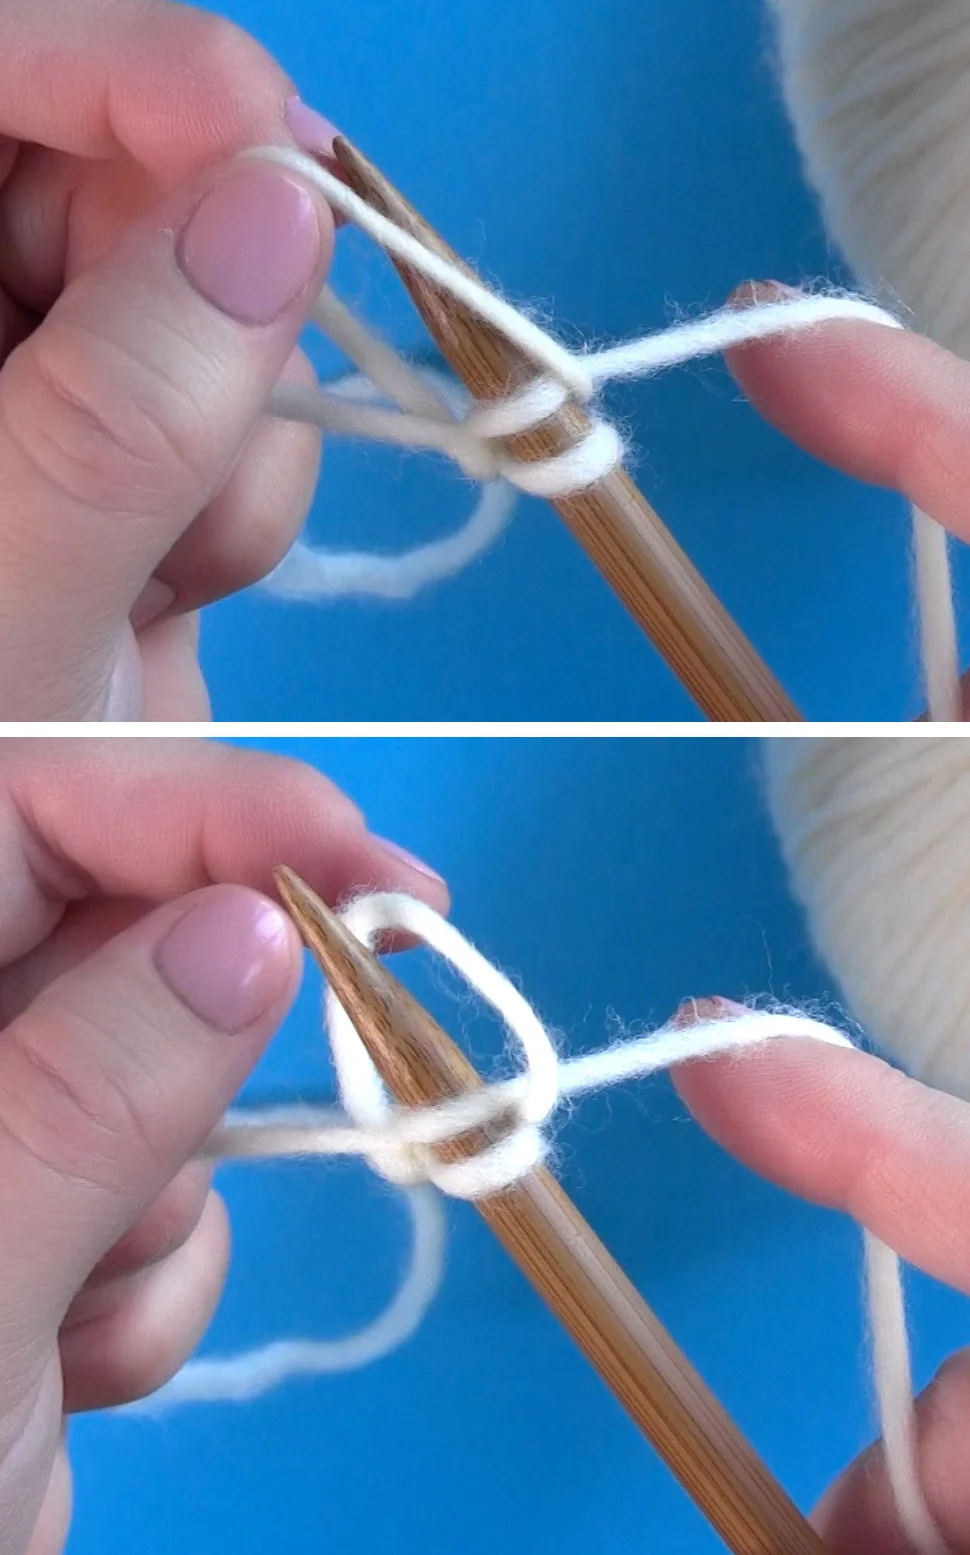 Passing yarn loop over the tip of the knitting needle to cast on with the thumb method.